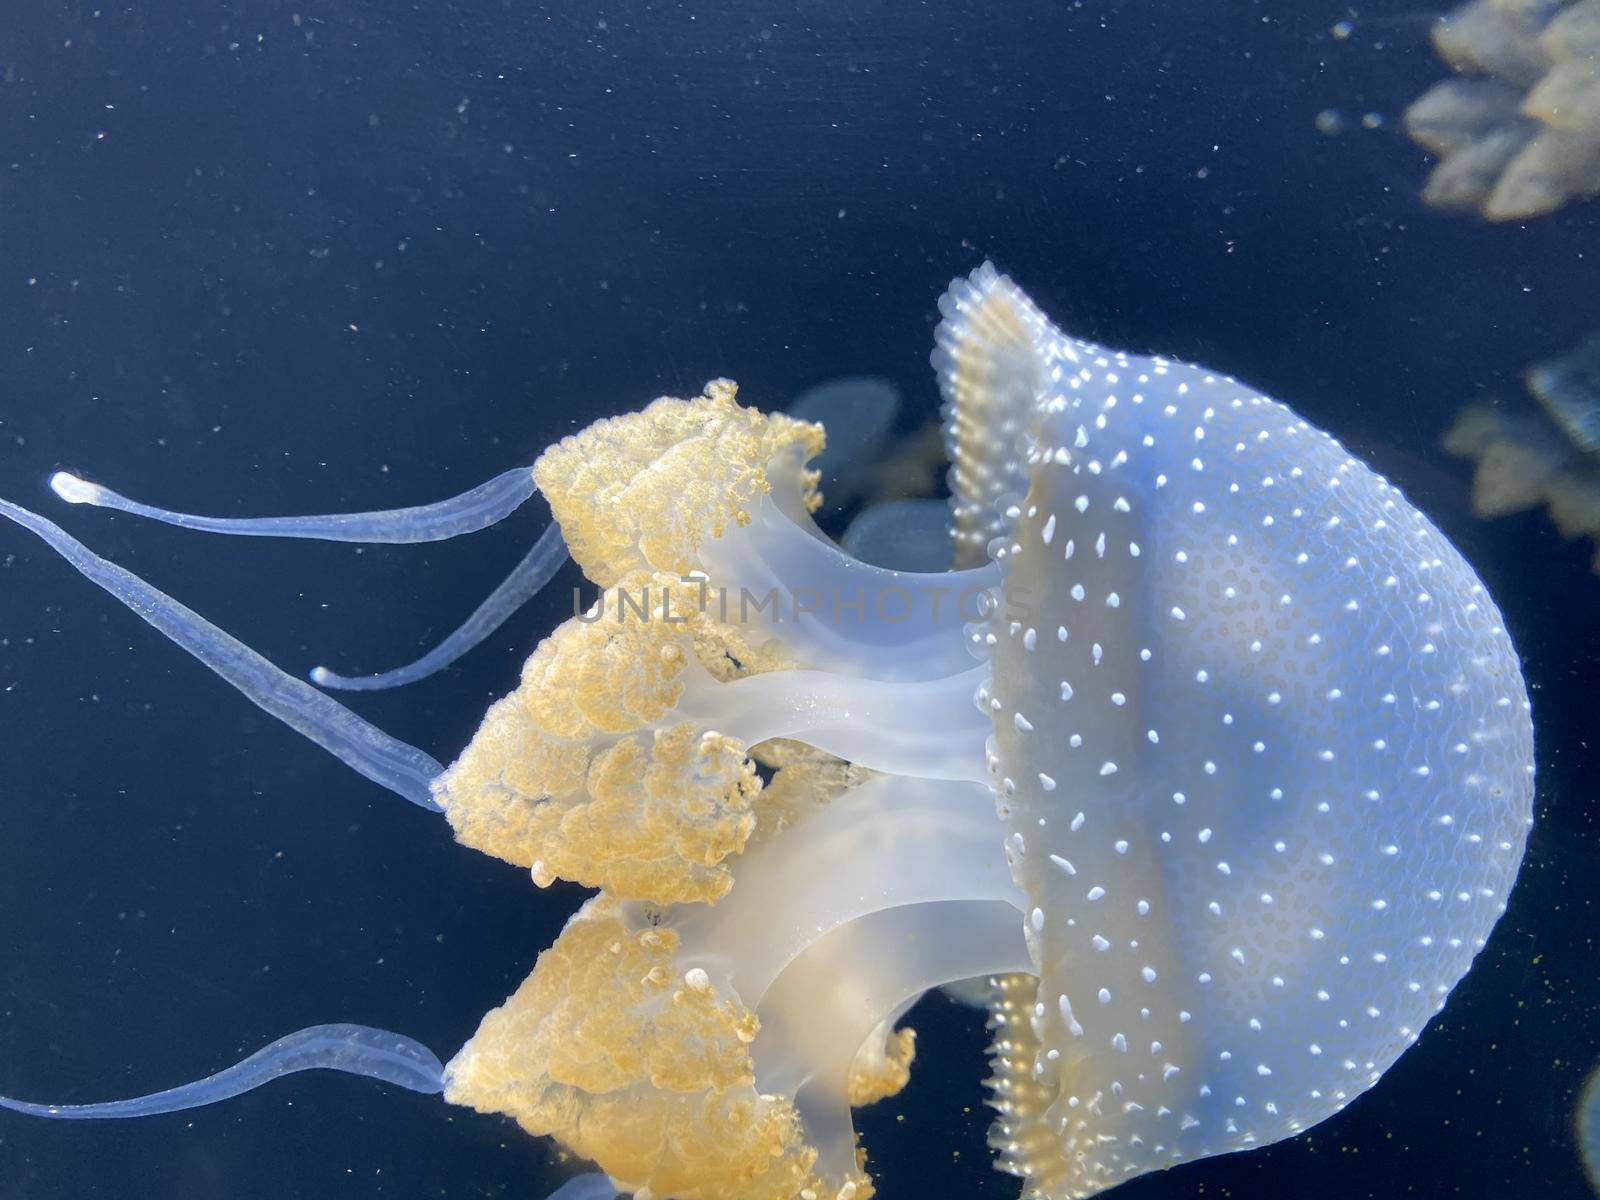 Dancing Phyllorhiza punctata jellyfish in the water. also known as the floating bell, Australian spotted jellyfish, brown jellyfish or the white-spotted jellyfish. It is native to the western Pacific. by Kyrylov